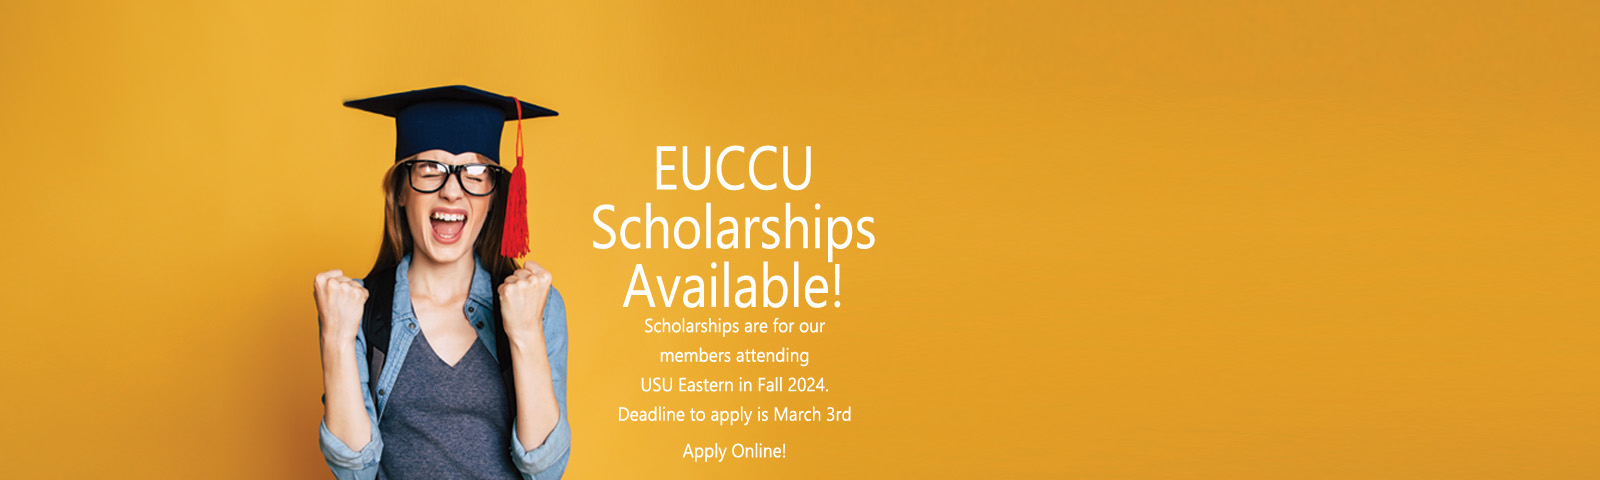 EUCCU Scholarships Available! Deadline to apply is March 3rd.